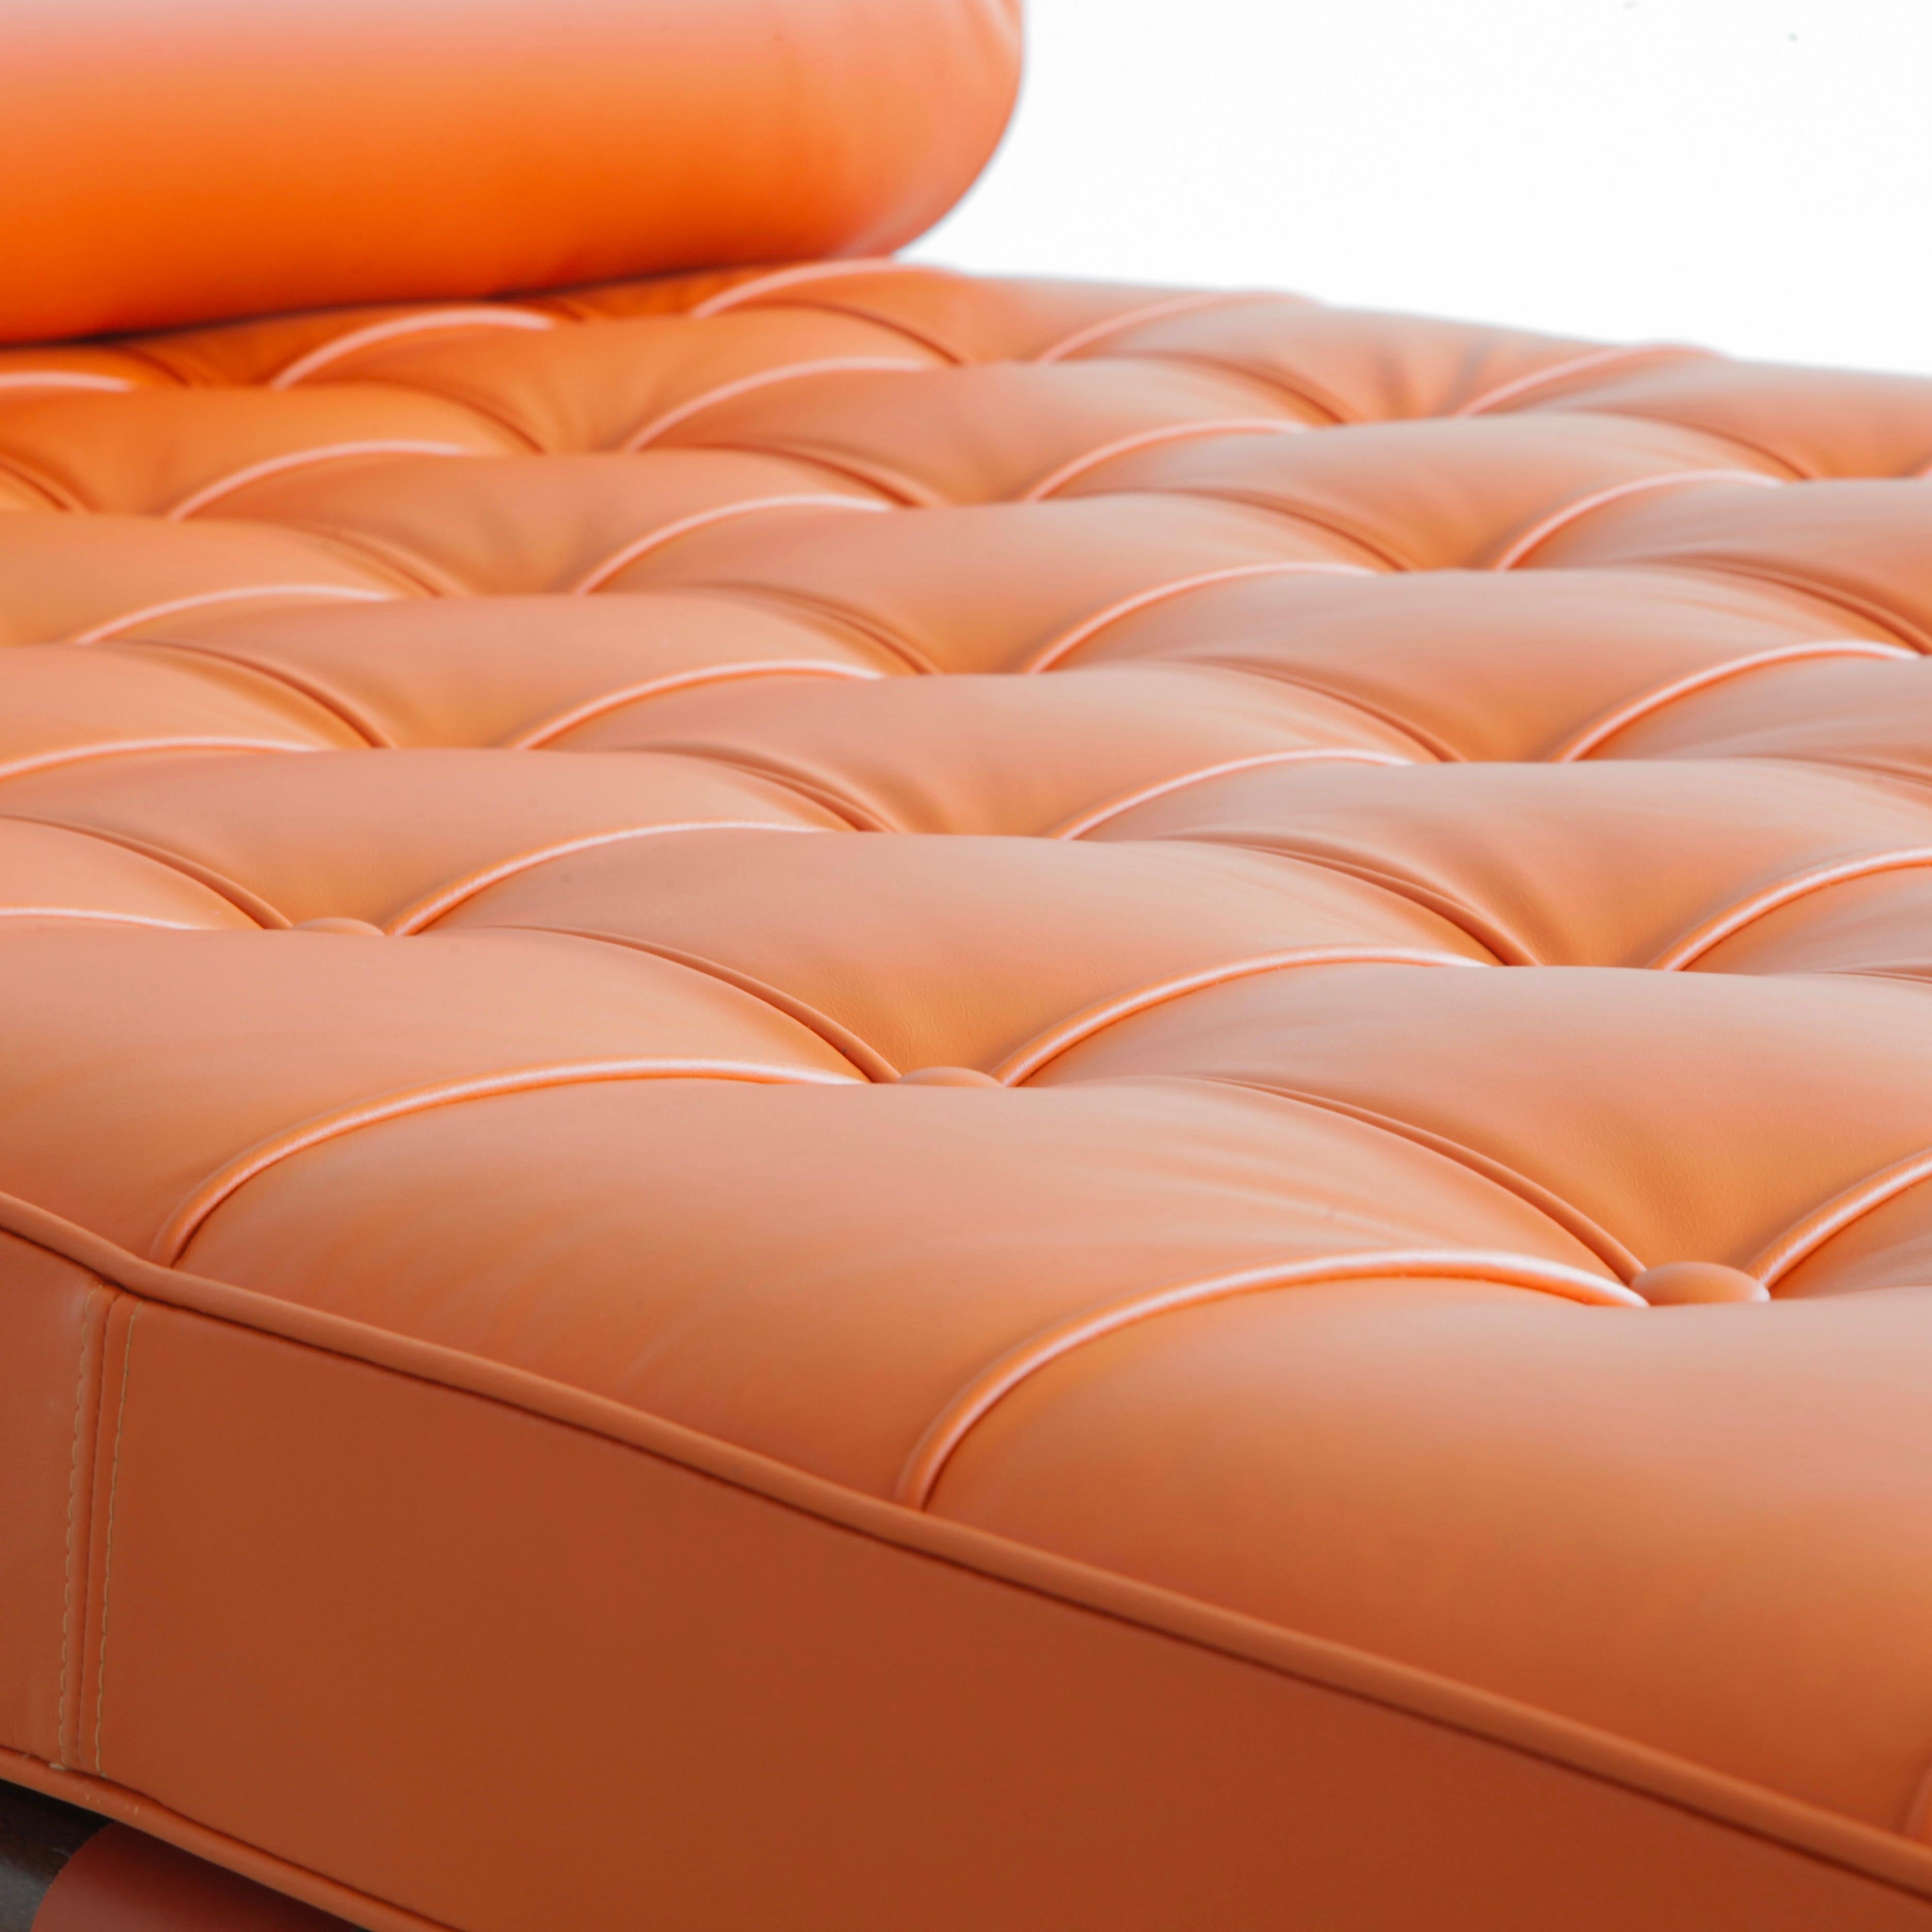 Daybed designed by Mies van der Rohe. U.S.A., Knoll International, 2010.

The Barcelona daybed with Hardwood frame, tubular steel legs with a polished stainless steel finish and a subtle orange-coloured leather mattress with foam filling. The 